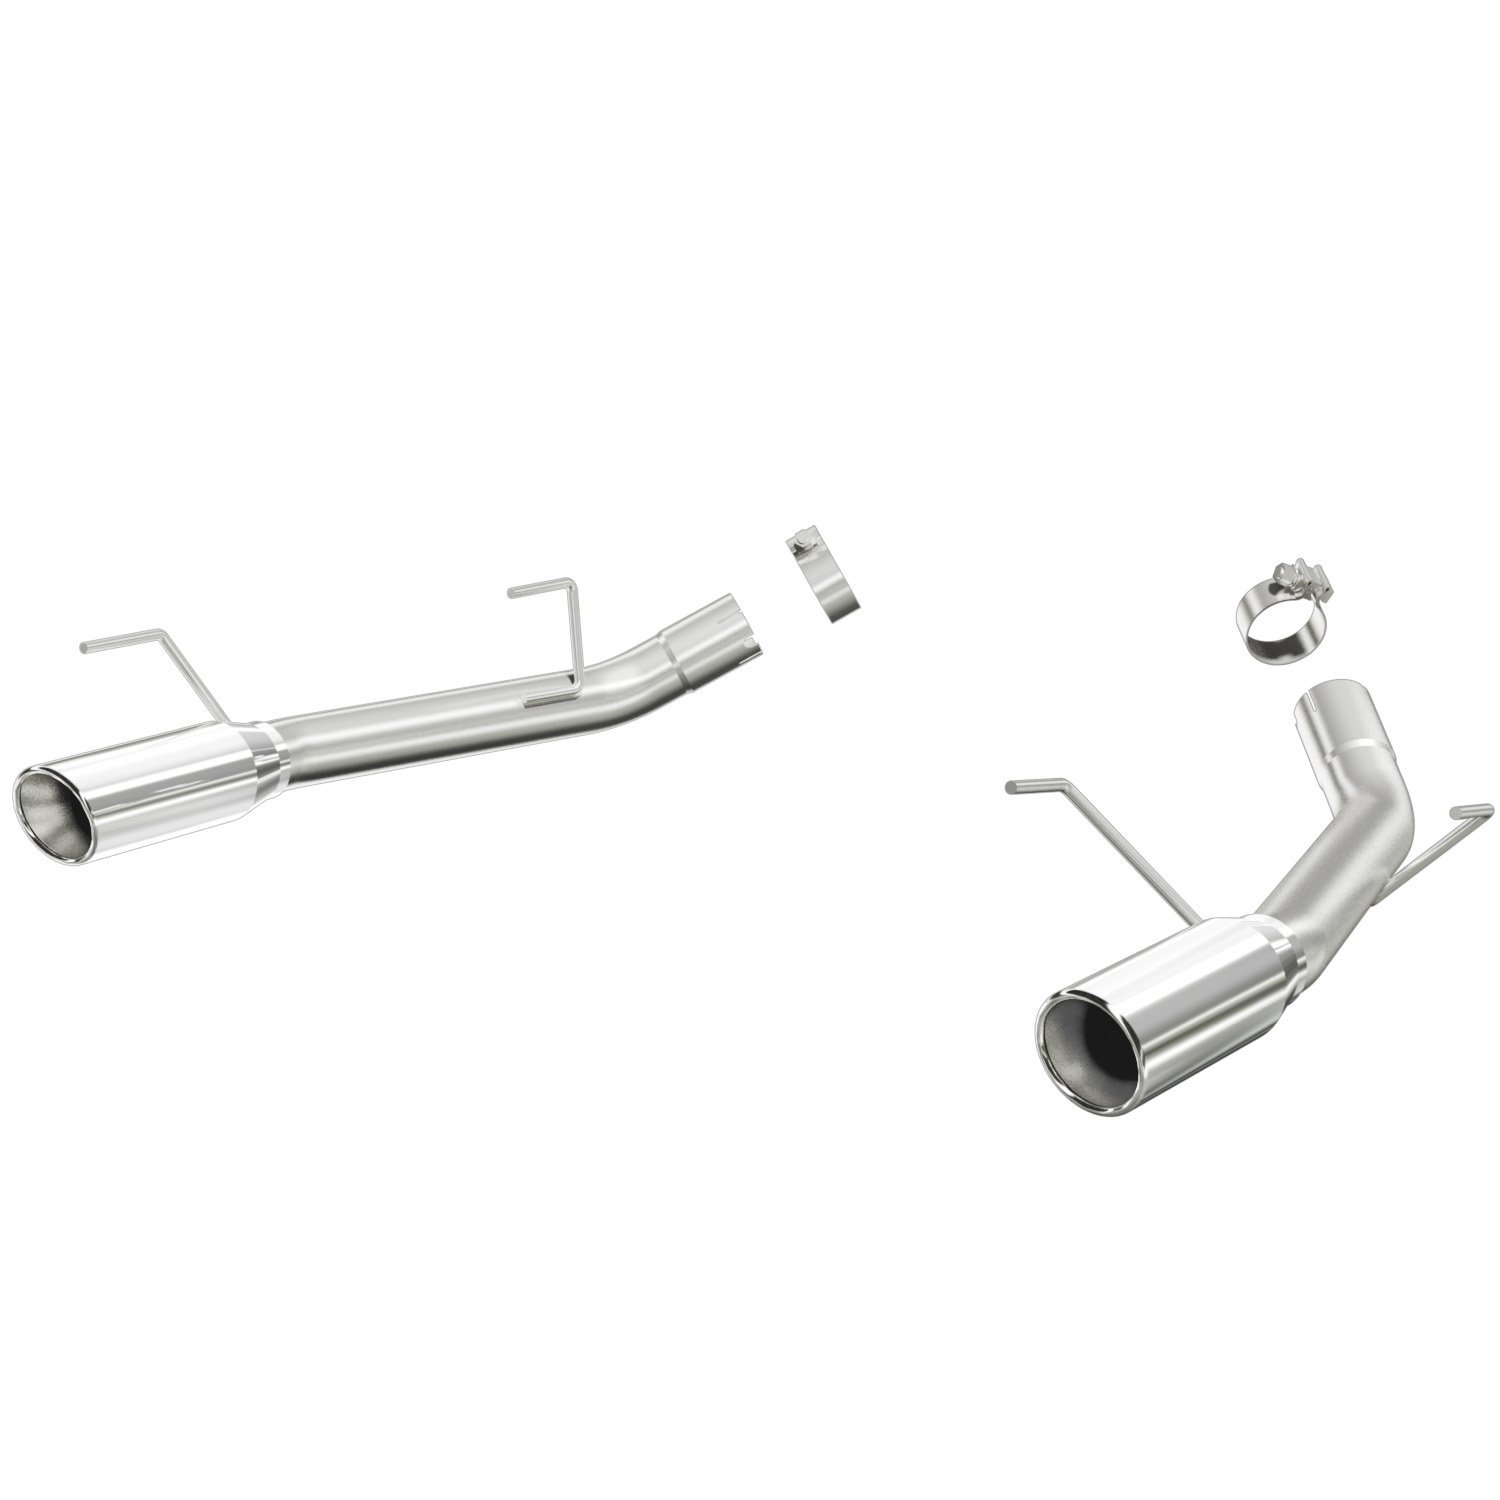 Race Series Axle-Back Exhaust System 2005-09 Mustang 4.0L V6